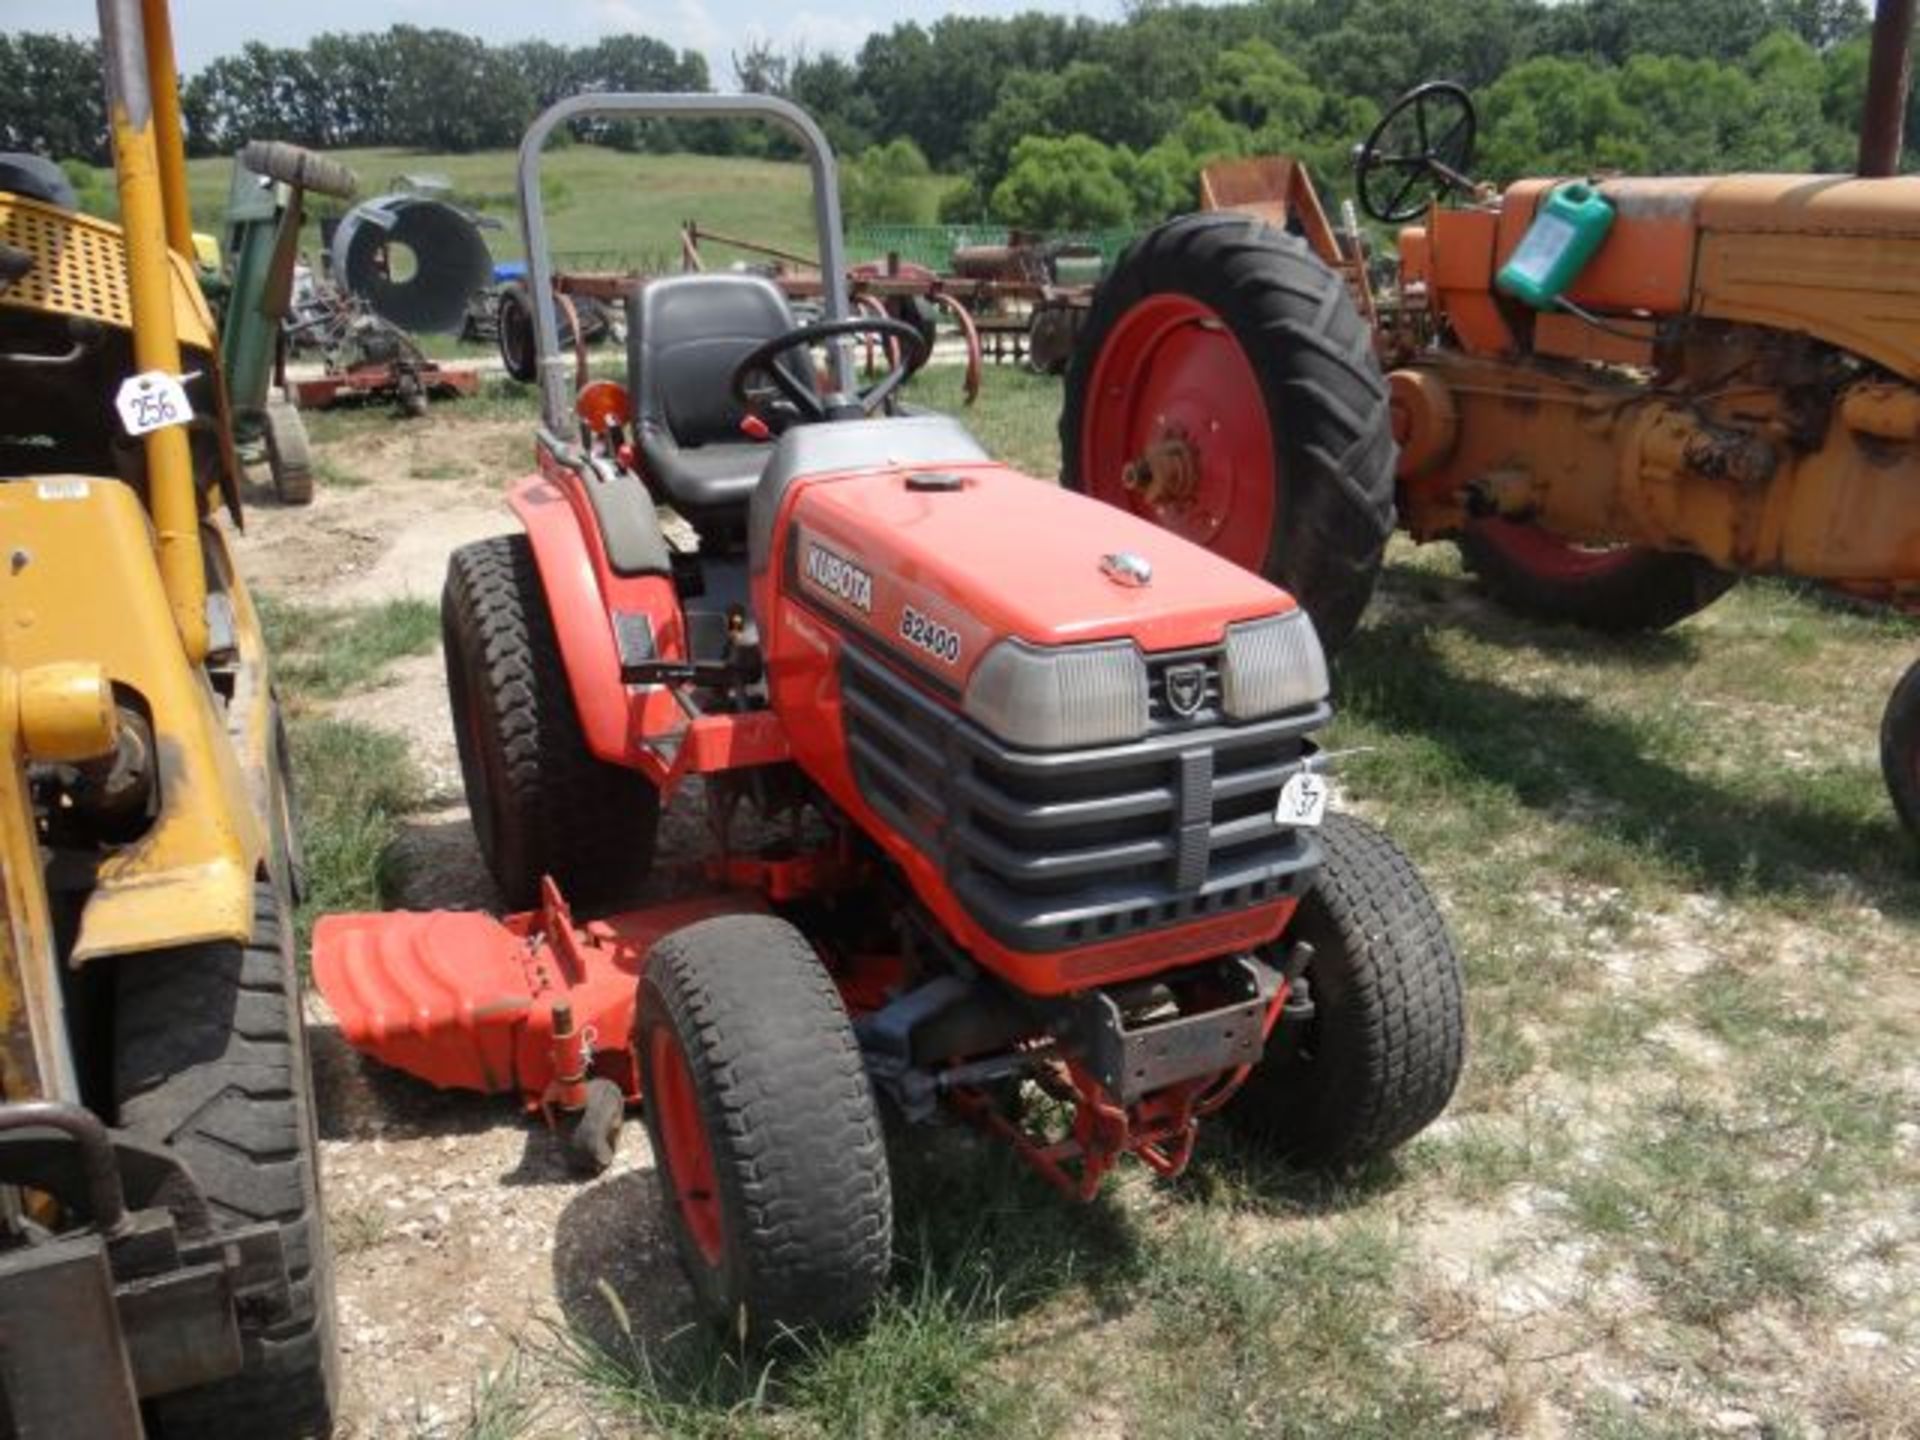 Kubota B2400 Compact Tractor 1475 hrs, MFWD, 60" Mid Mount Deck, 3pt, 540 PTO, Hydro - Image 2 of 3